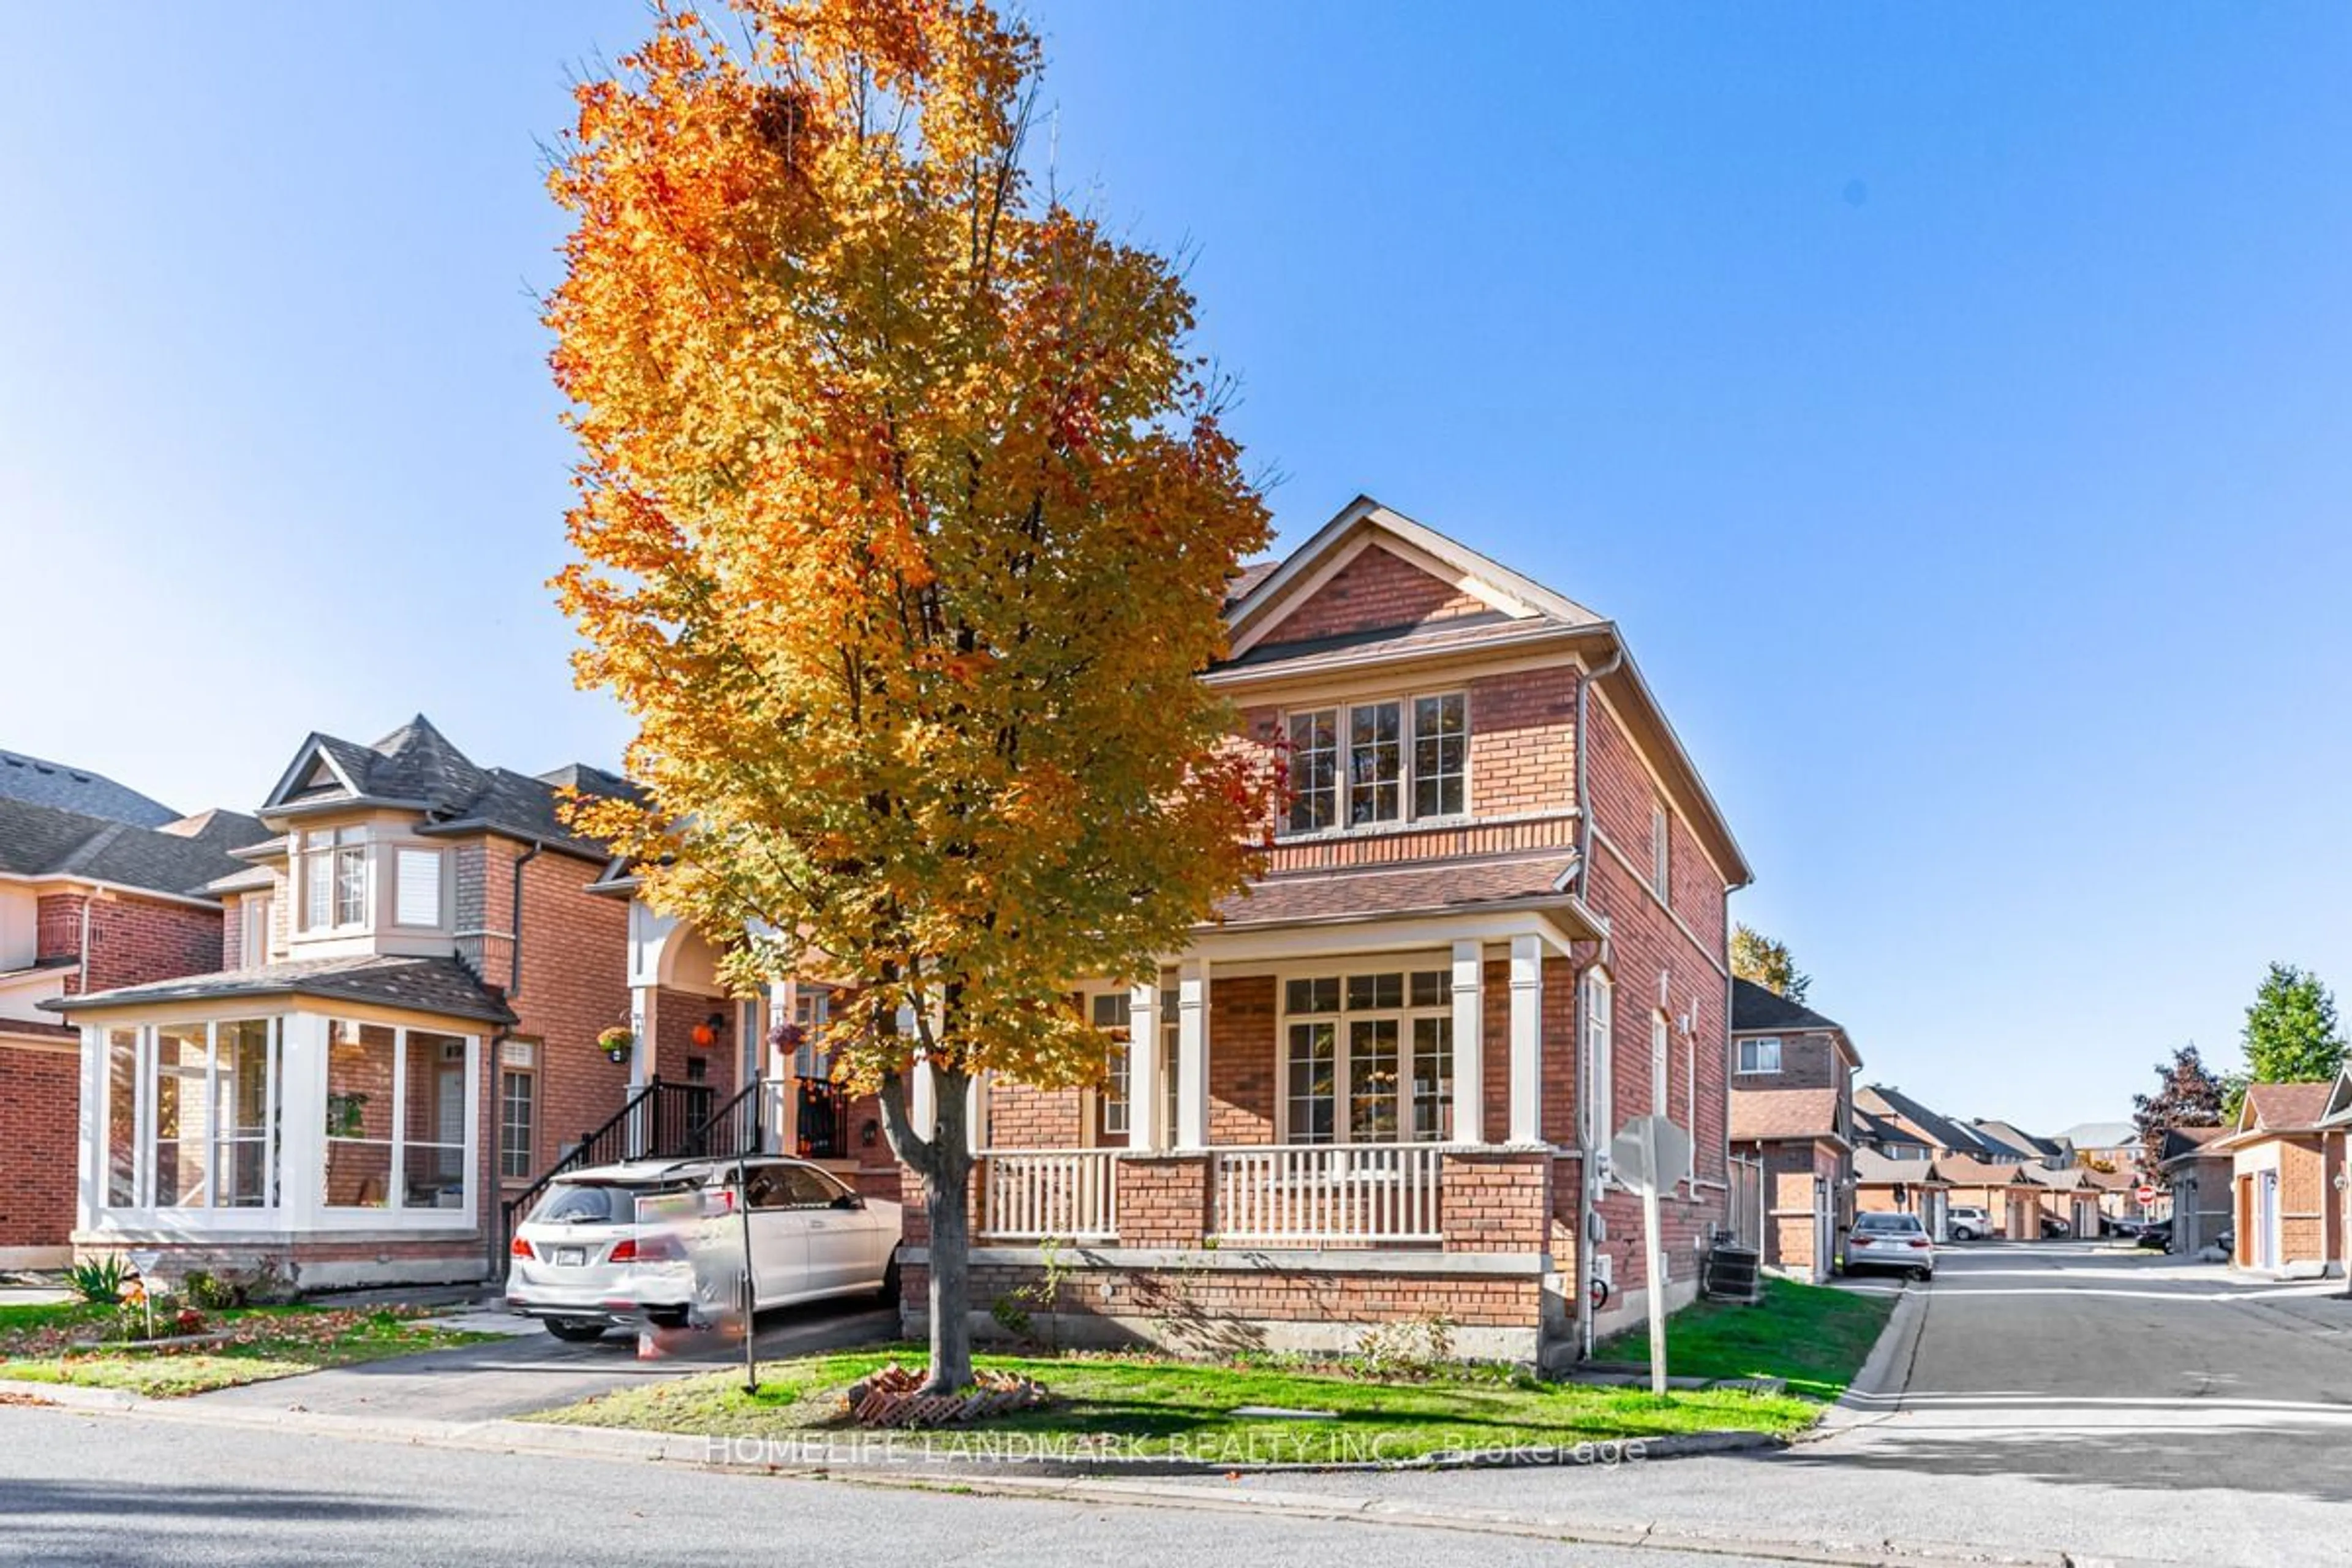 Home with brick exterior material for 24 Crawford St, Markham Ontario L6C 2L4